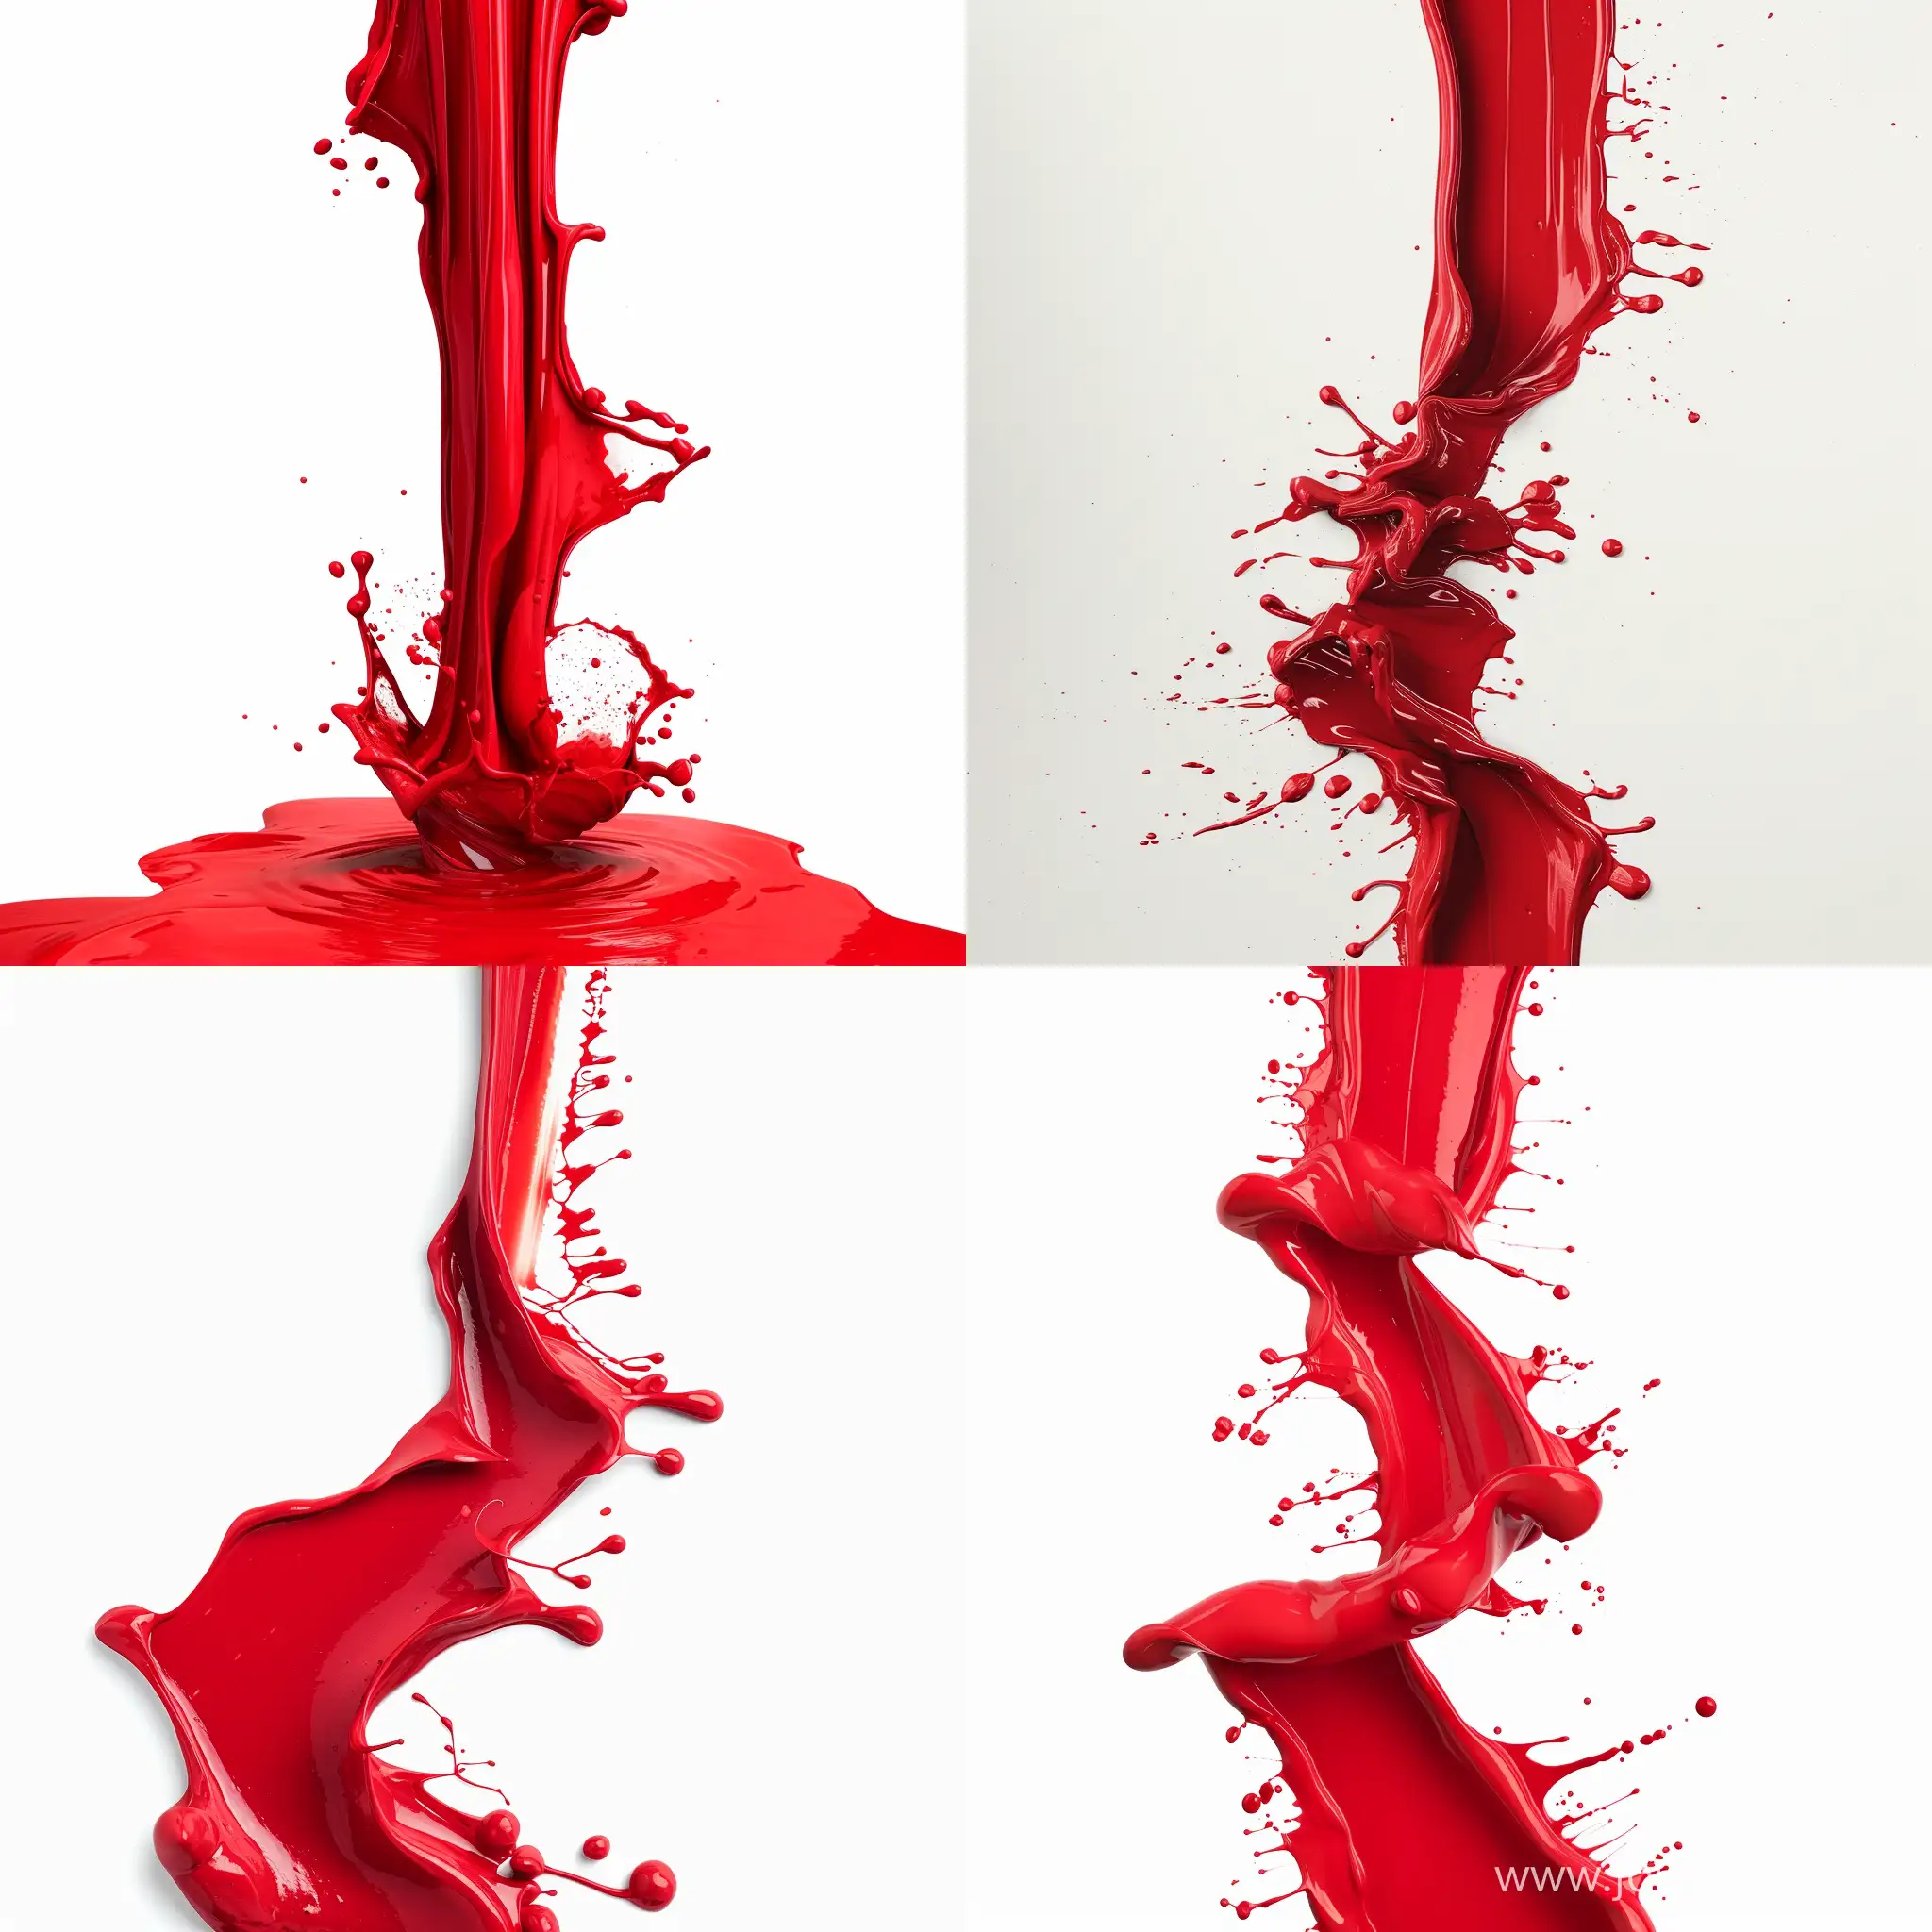 Vibrant-Symmetrical-Flowing-Red-Paint-Stream